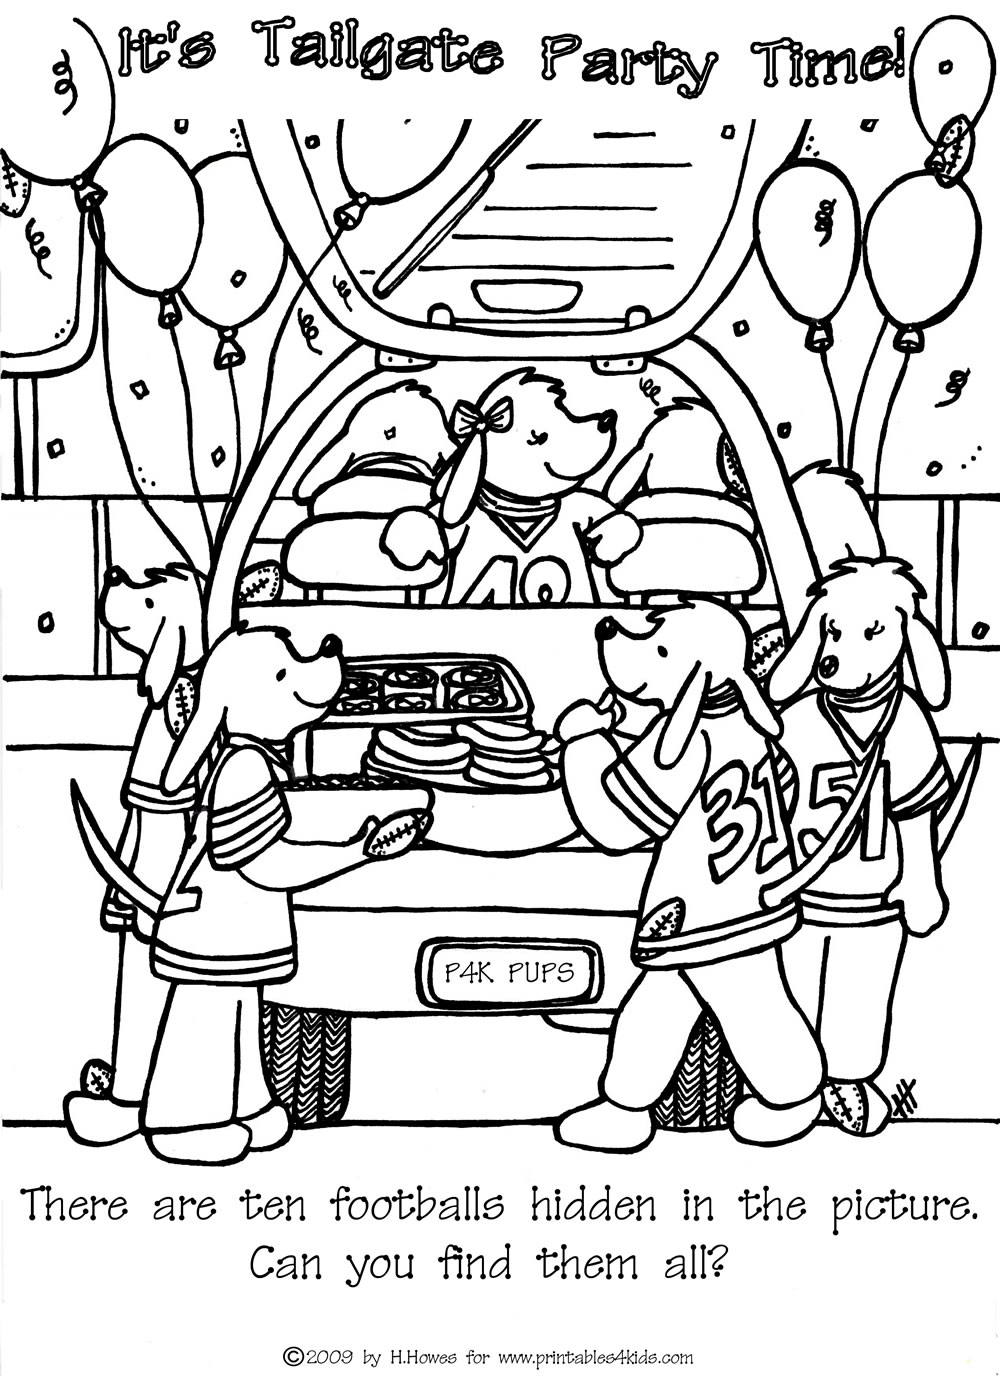 Find the Hidden Footballs Tailgate : Printables for Kids – free word search  puzzles, coloring pages, and other activities